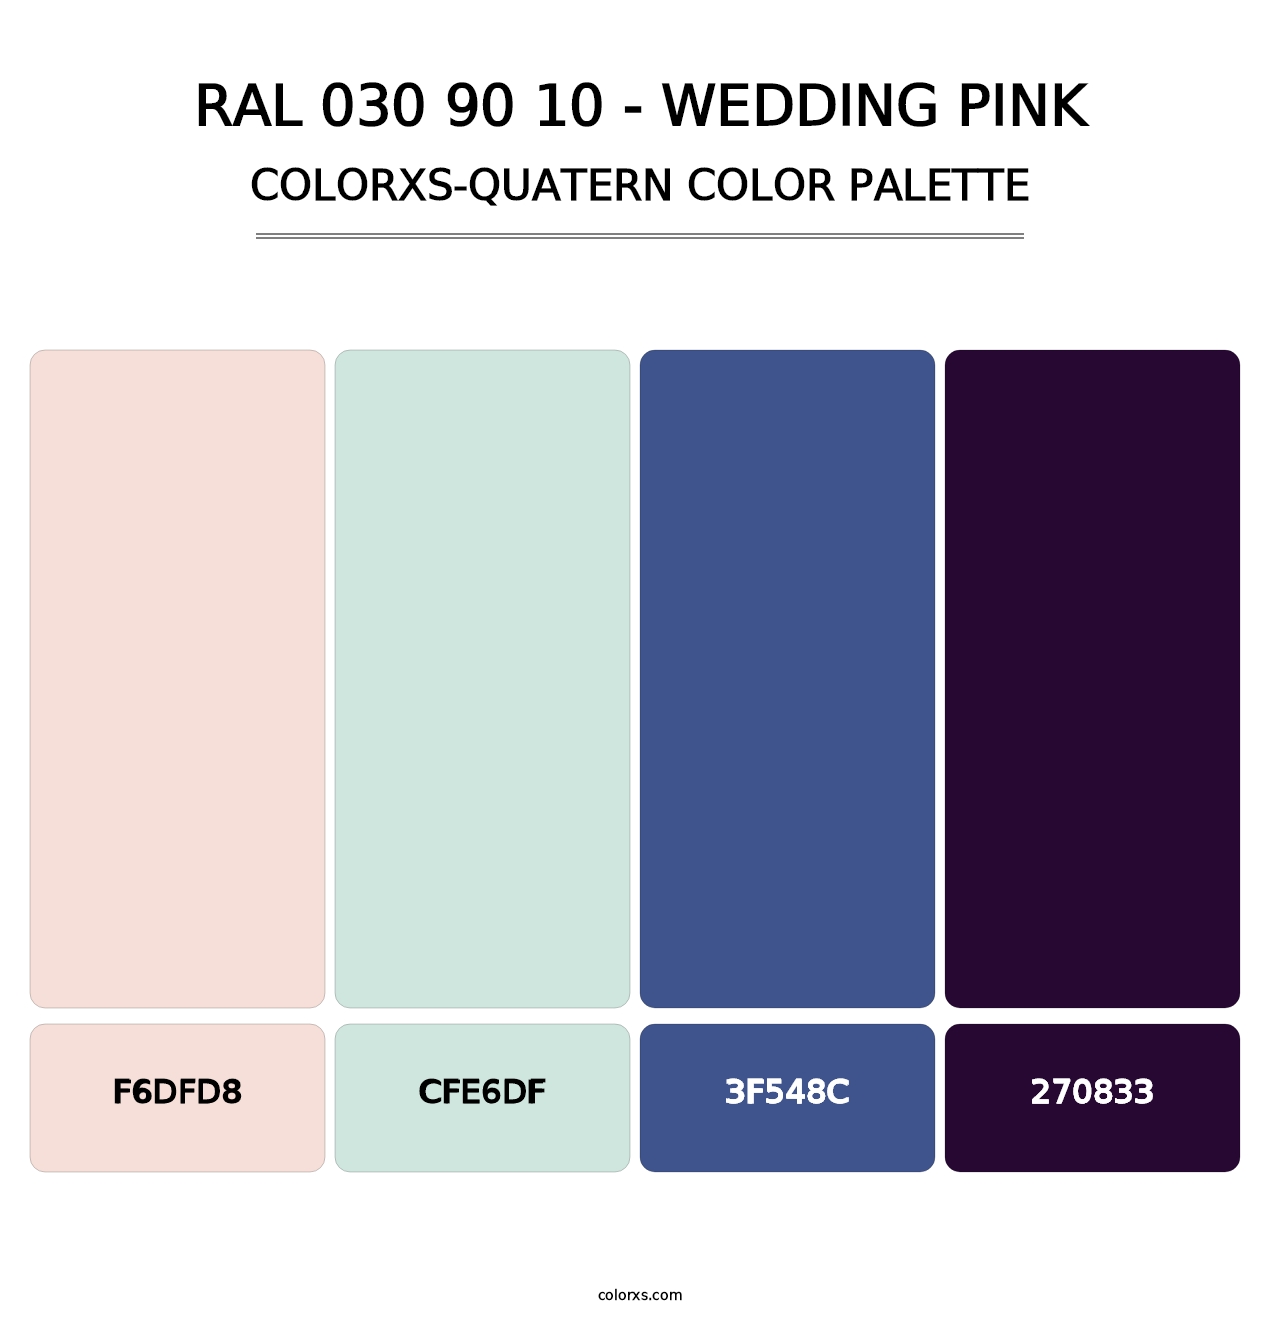 RAL 030 90 10 - Wedding Pink - Colorxs Quatern Palette